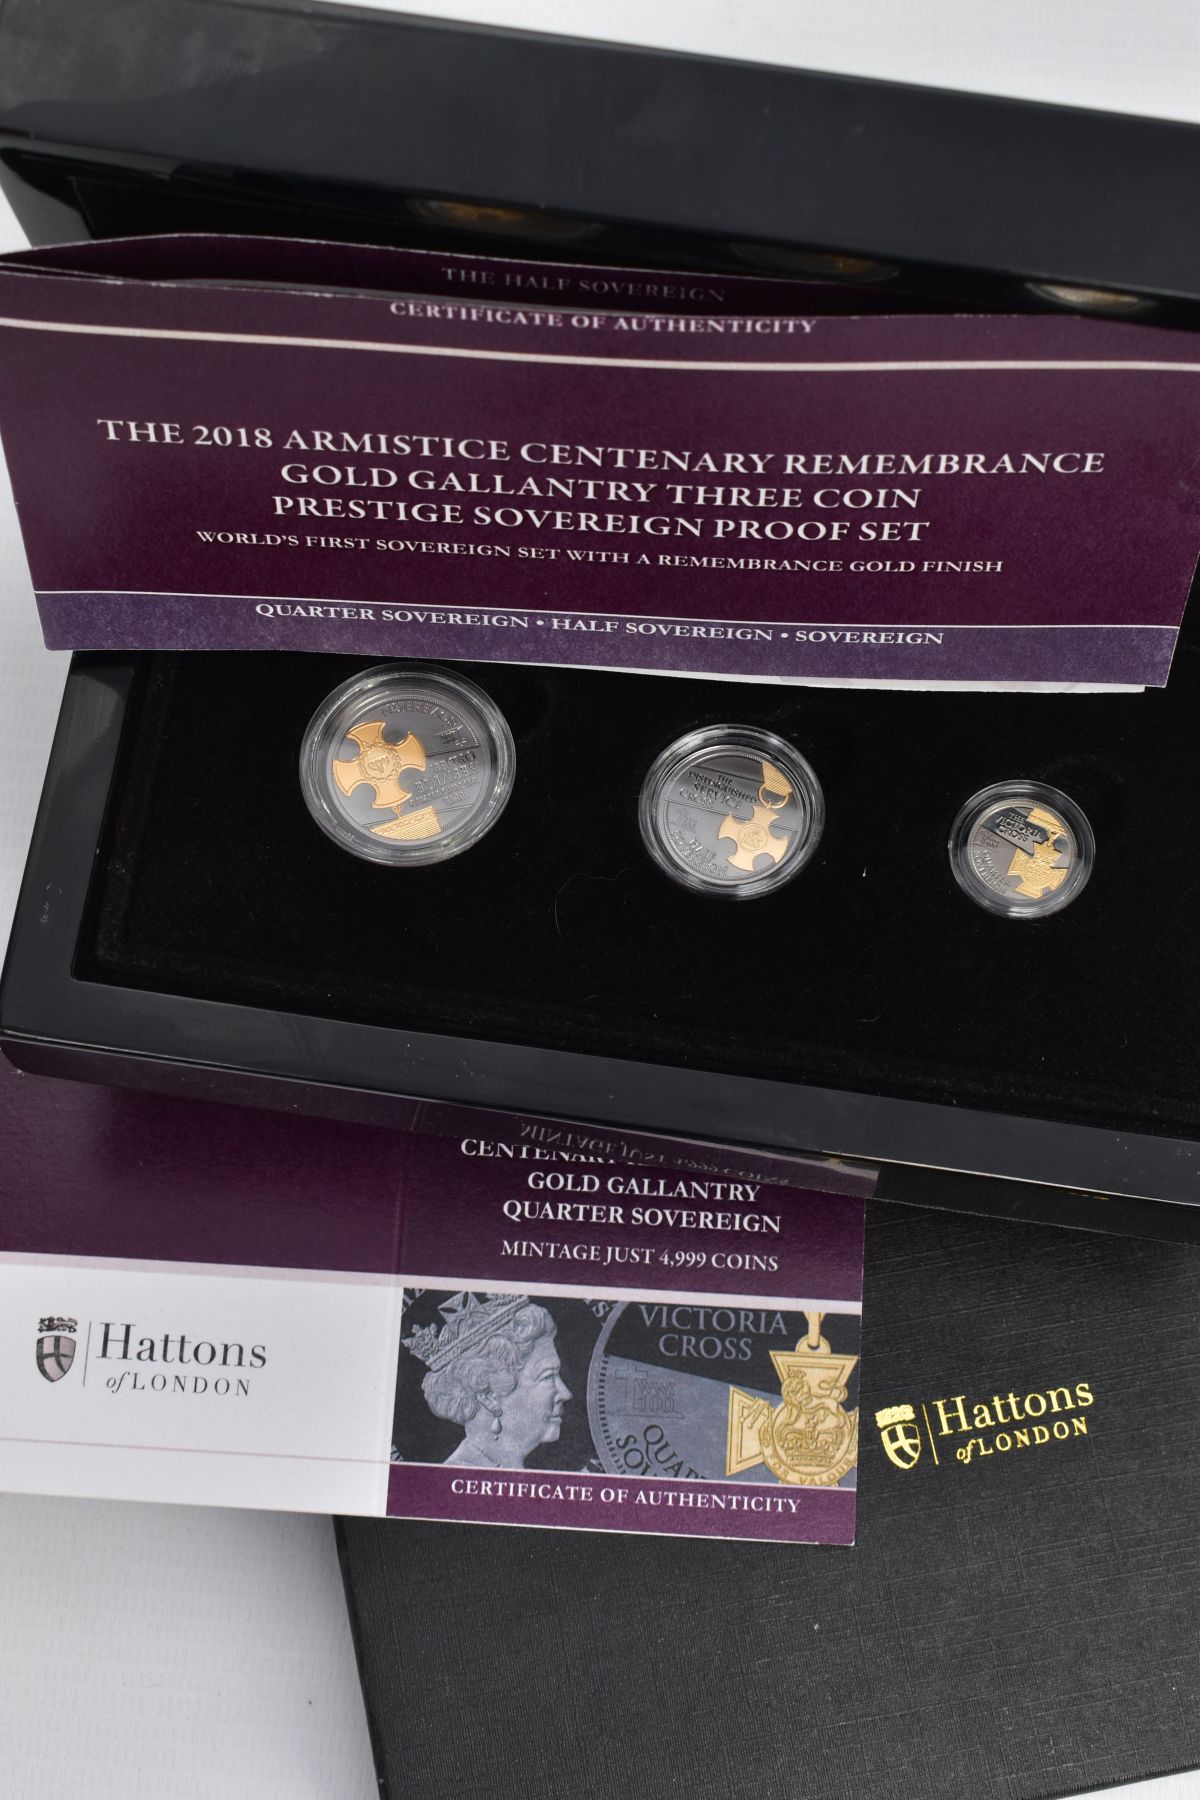 A HATTONS OF LONDON 2018 ARMISTICE CENTENARY REMEMBRANCE GOLD GALLANTRY THREE COIN SOVEREIGN PROOF